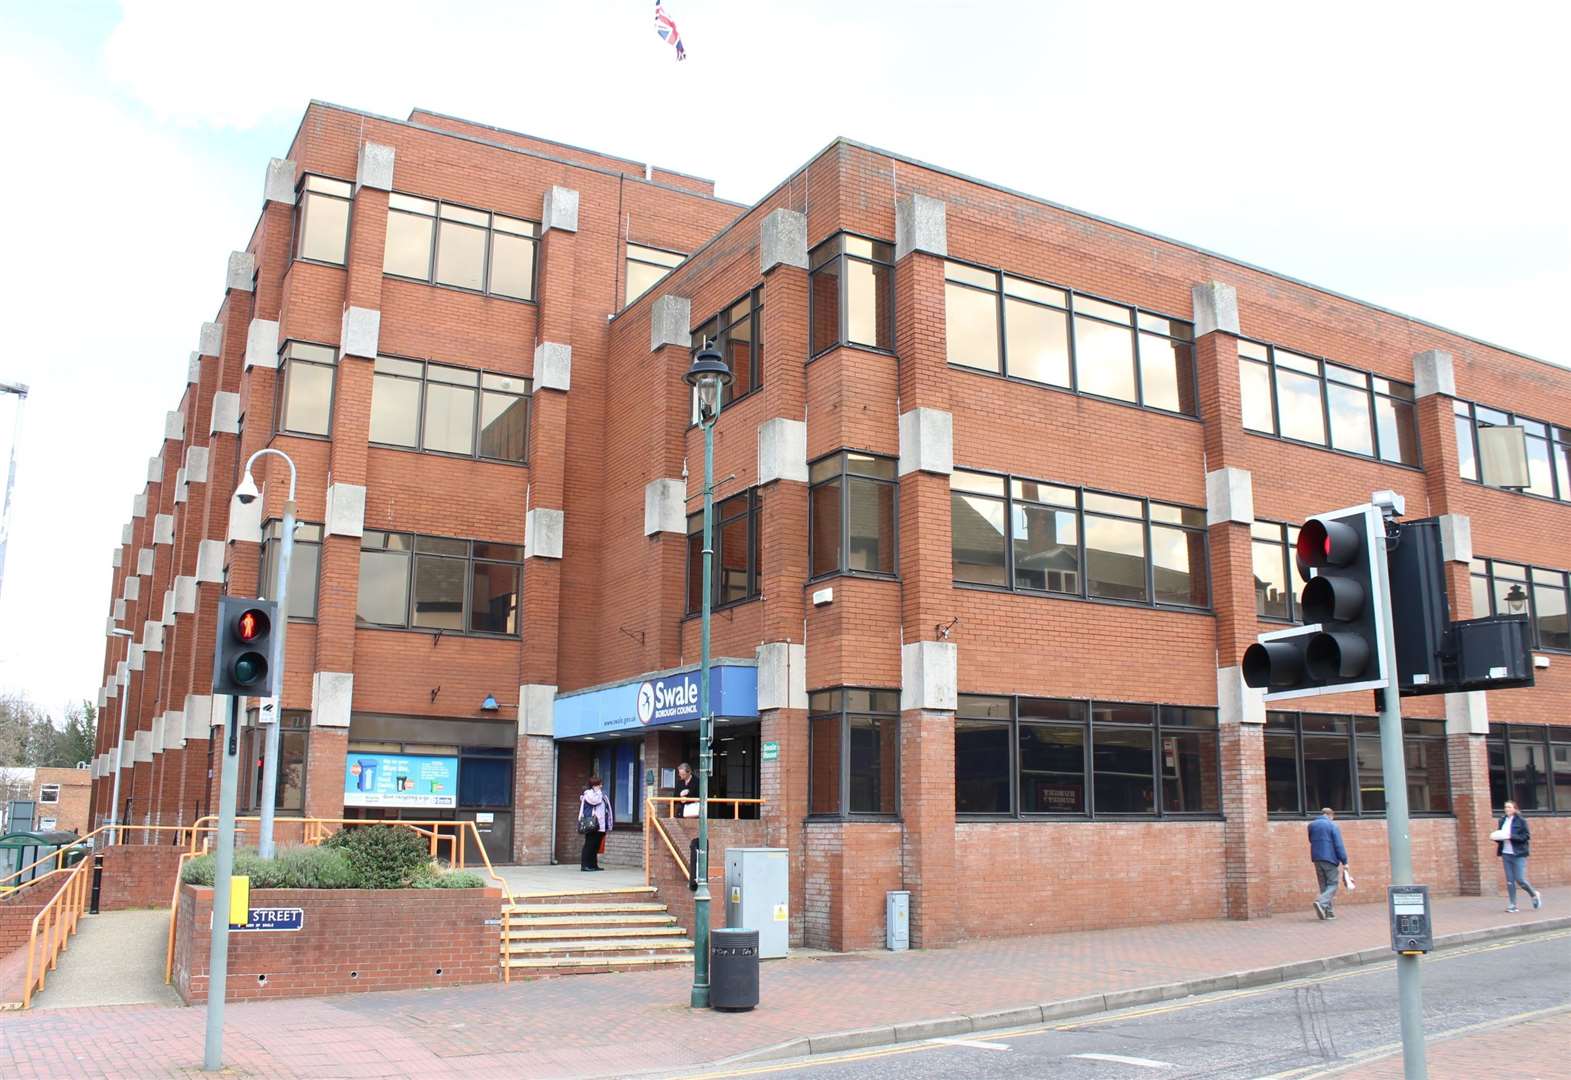 Swale council offices will be shut on Friday afternoons